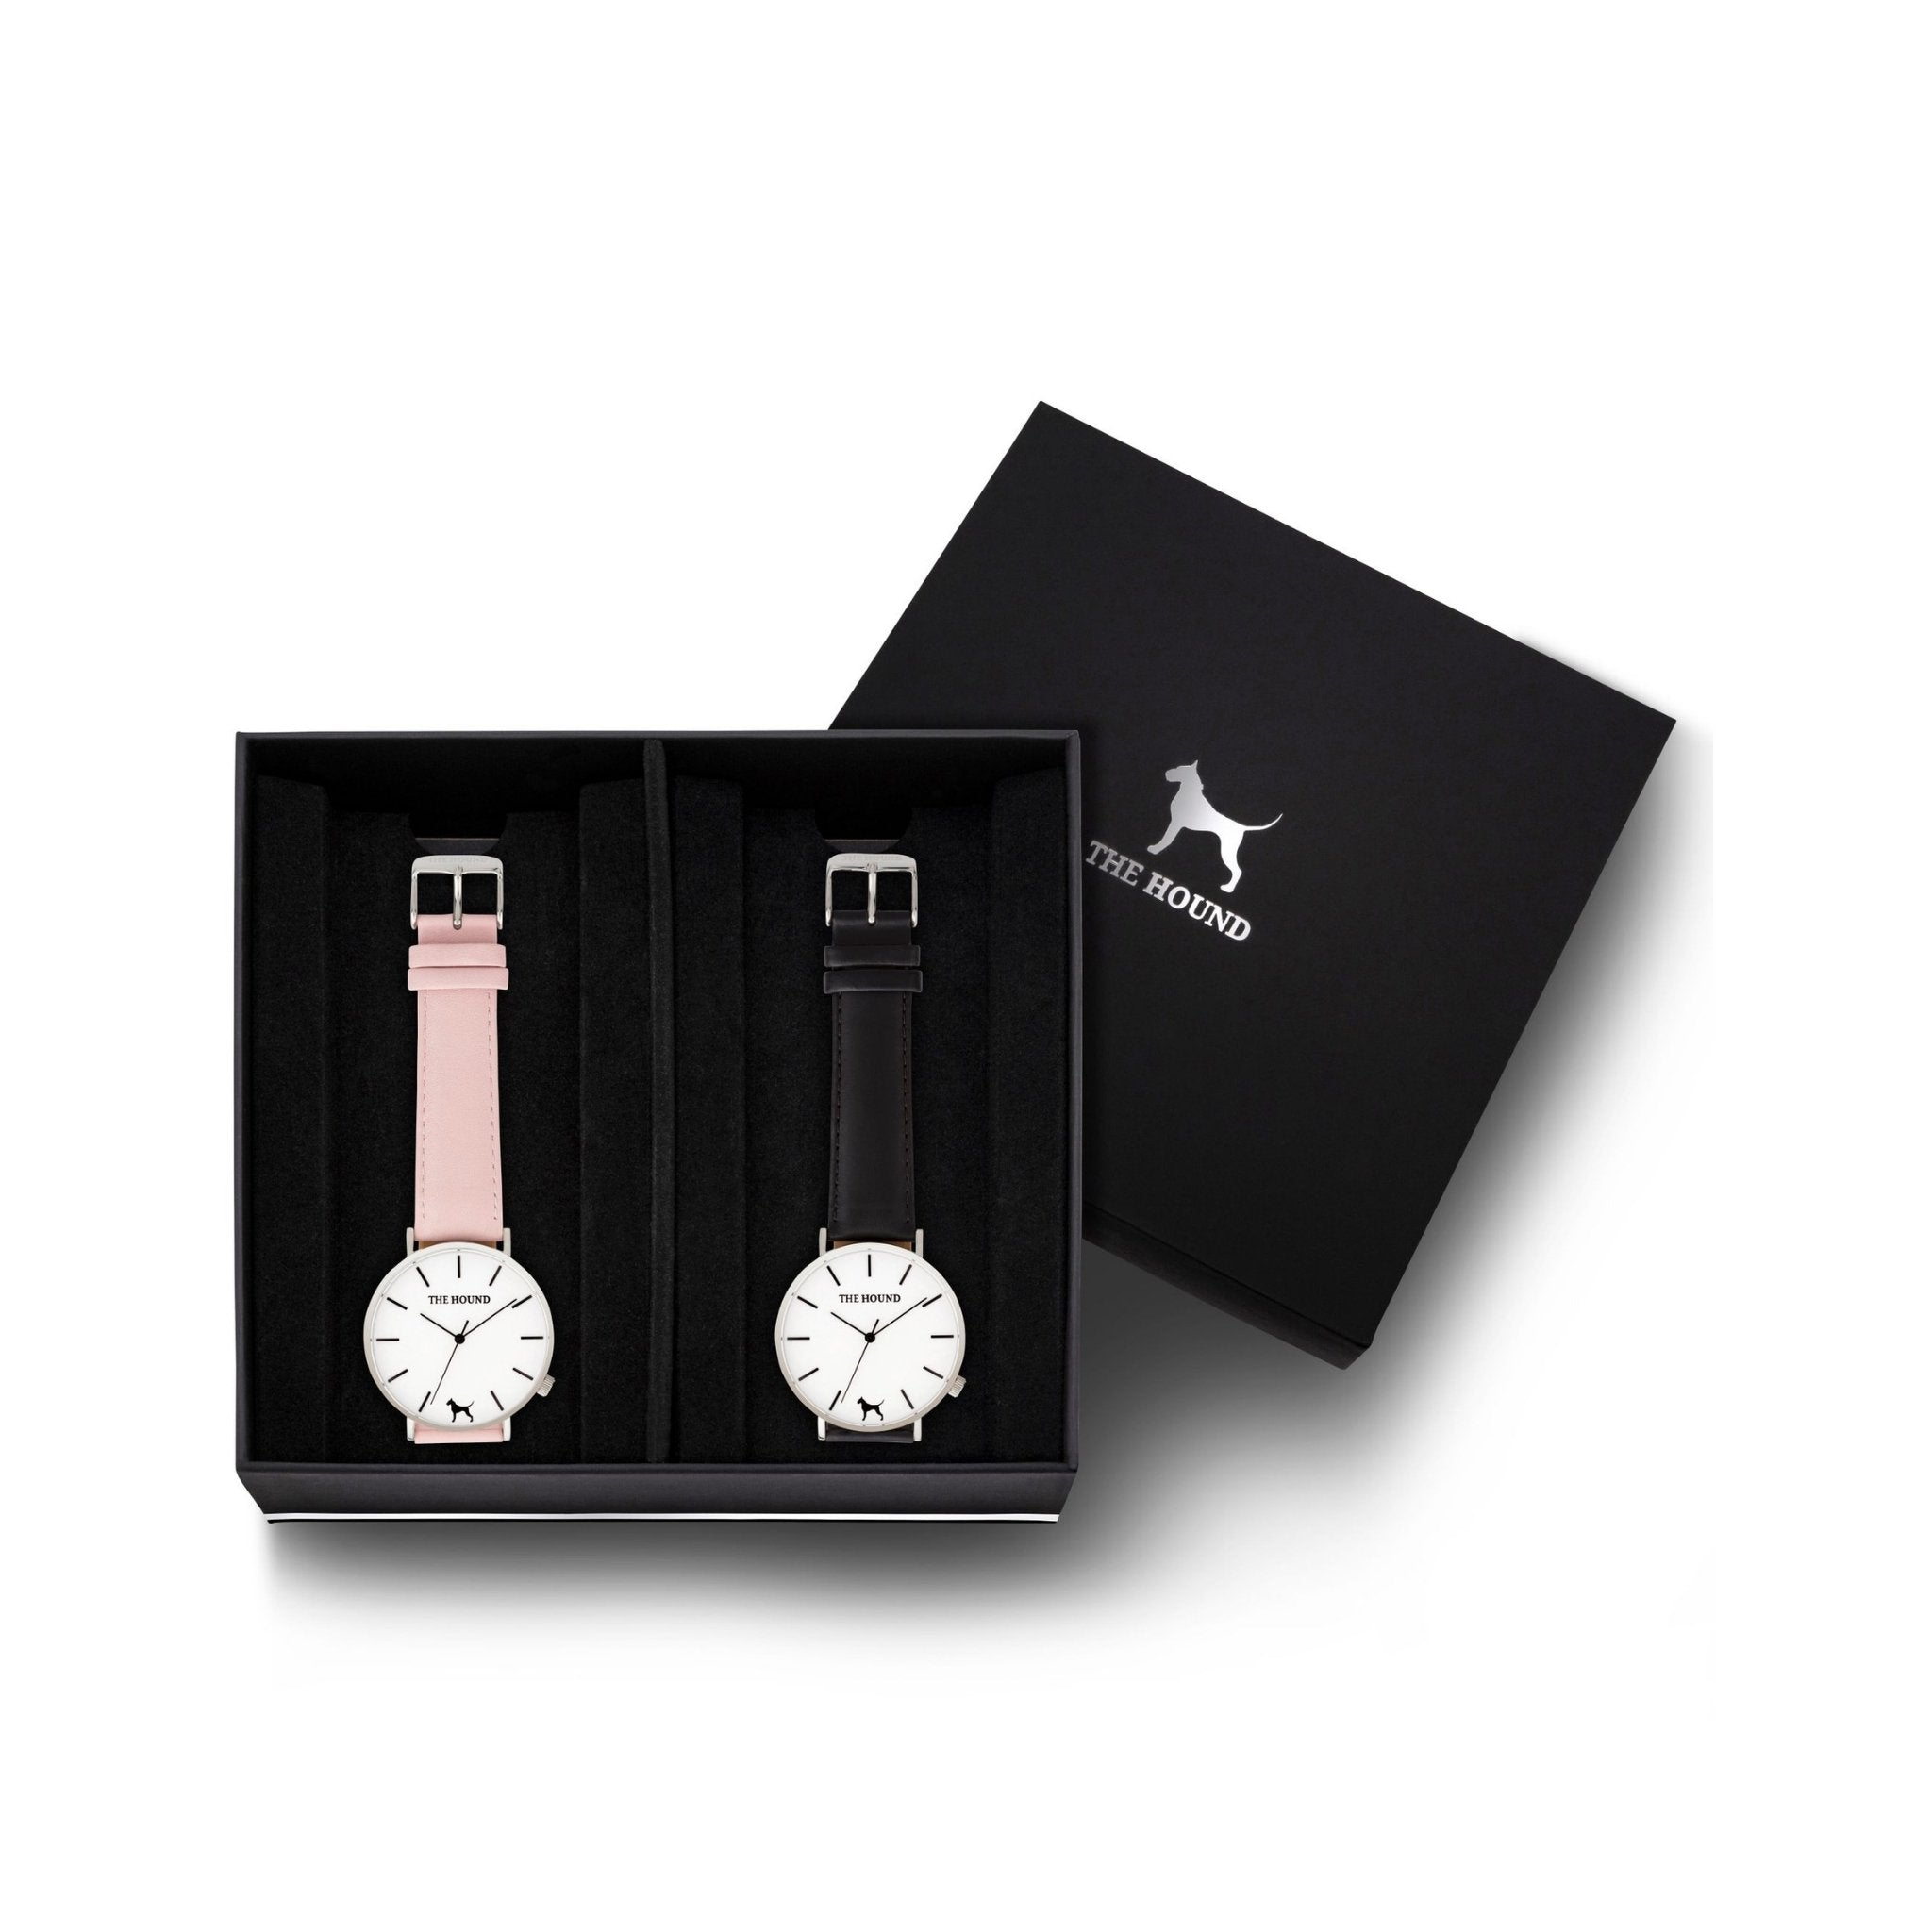 Custom gift set - Silver and white watch with stitched blush pink genuine leather band and a silver and white watch with stitched black genuine leather band